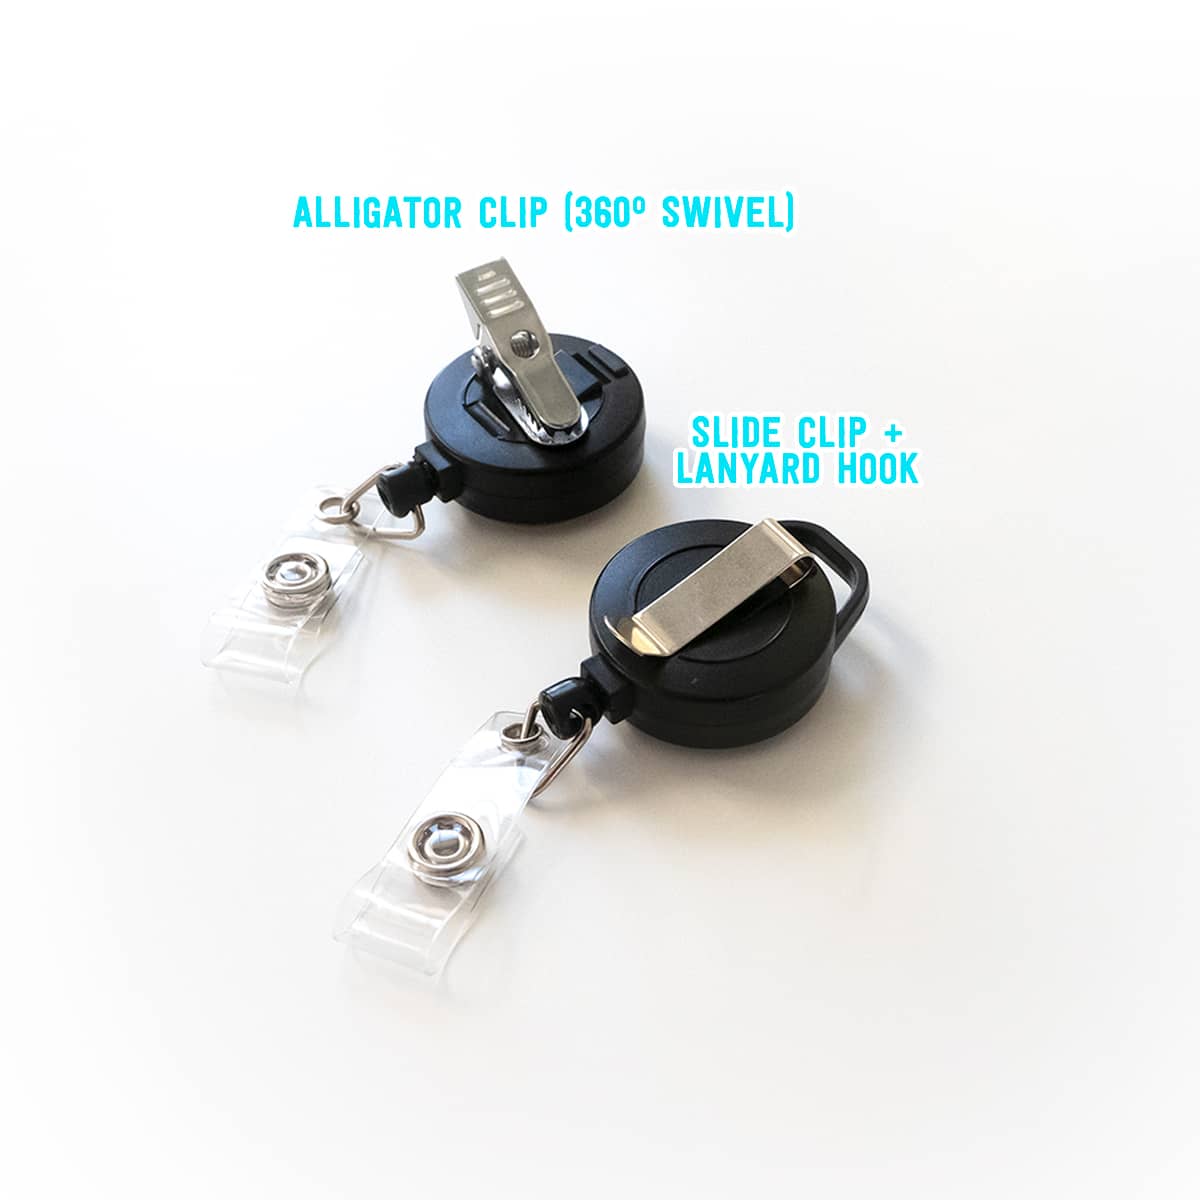 Comprar 3 Pack Badge Holders with Retractable Reel Clip, Black